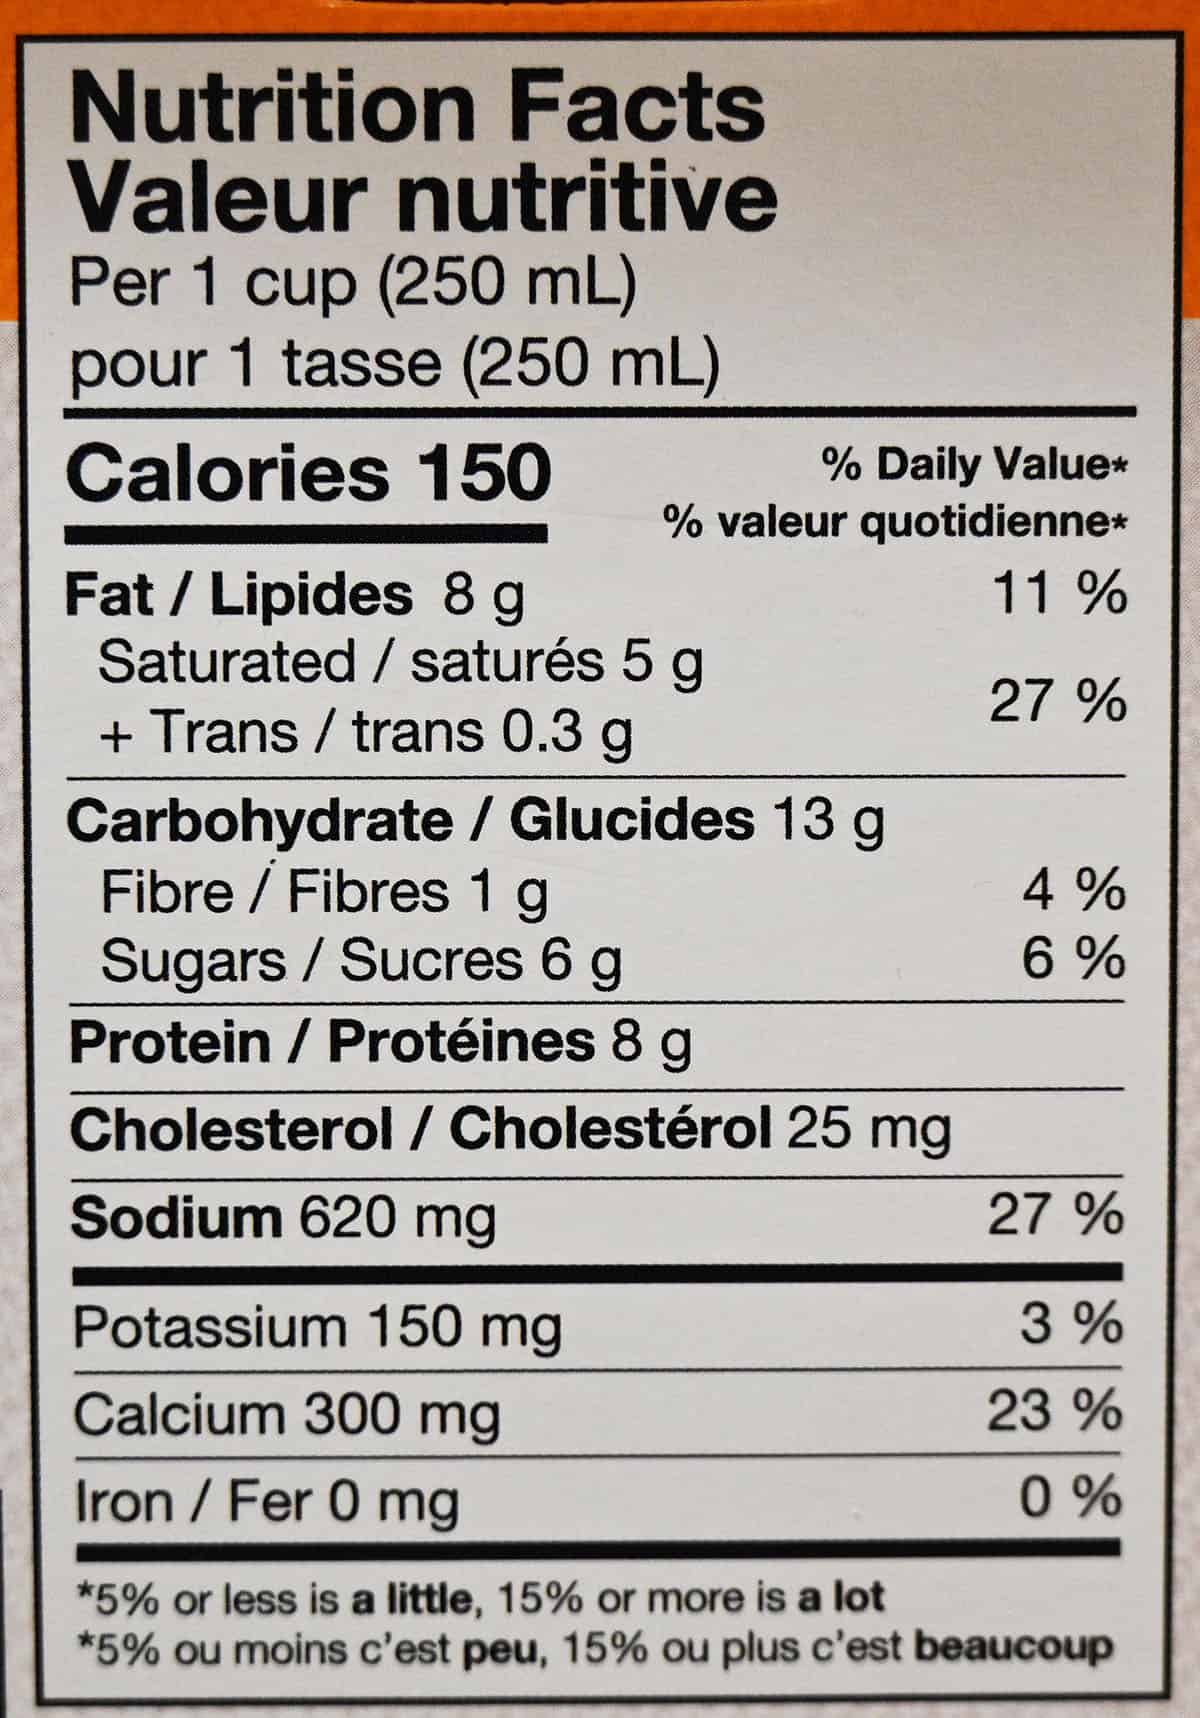 Image of the Costco broccoli cheddar soup nutrition facts label from the package.